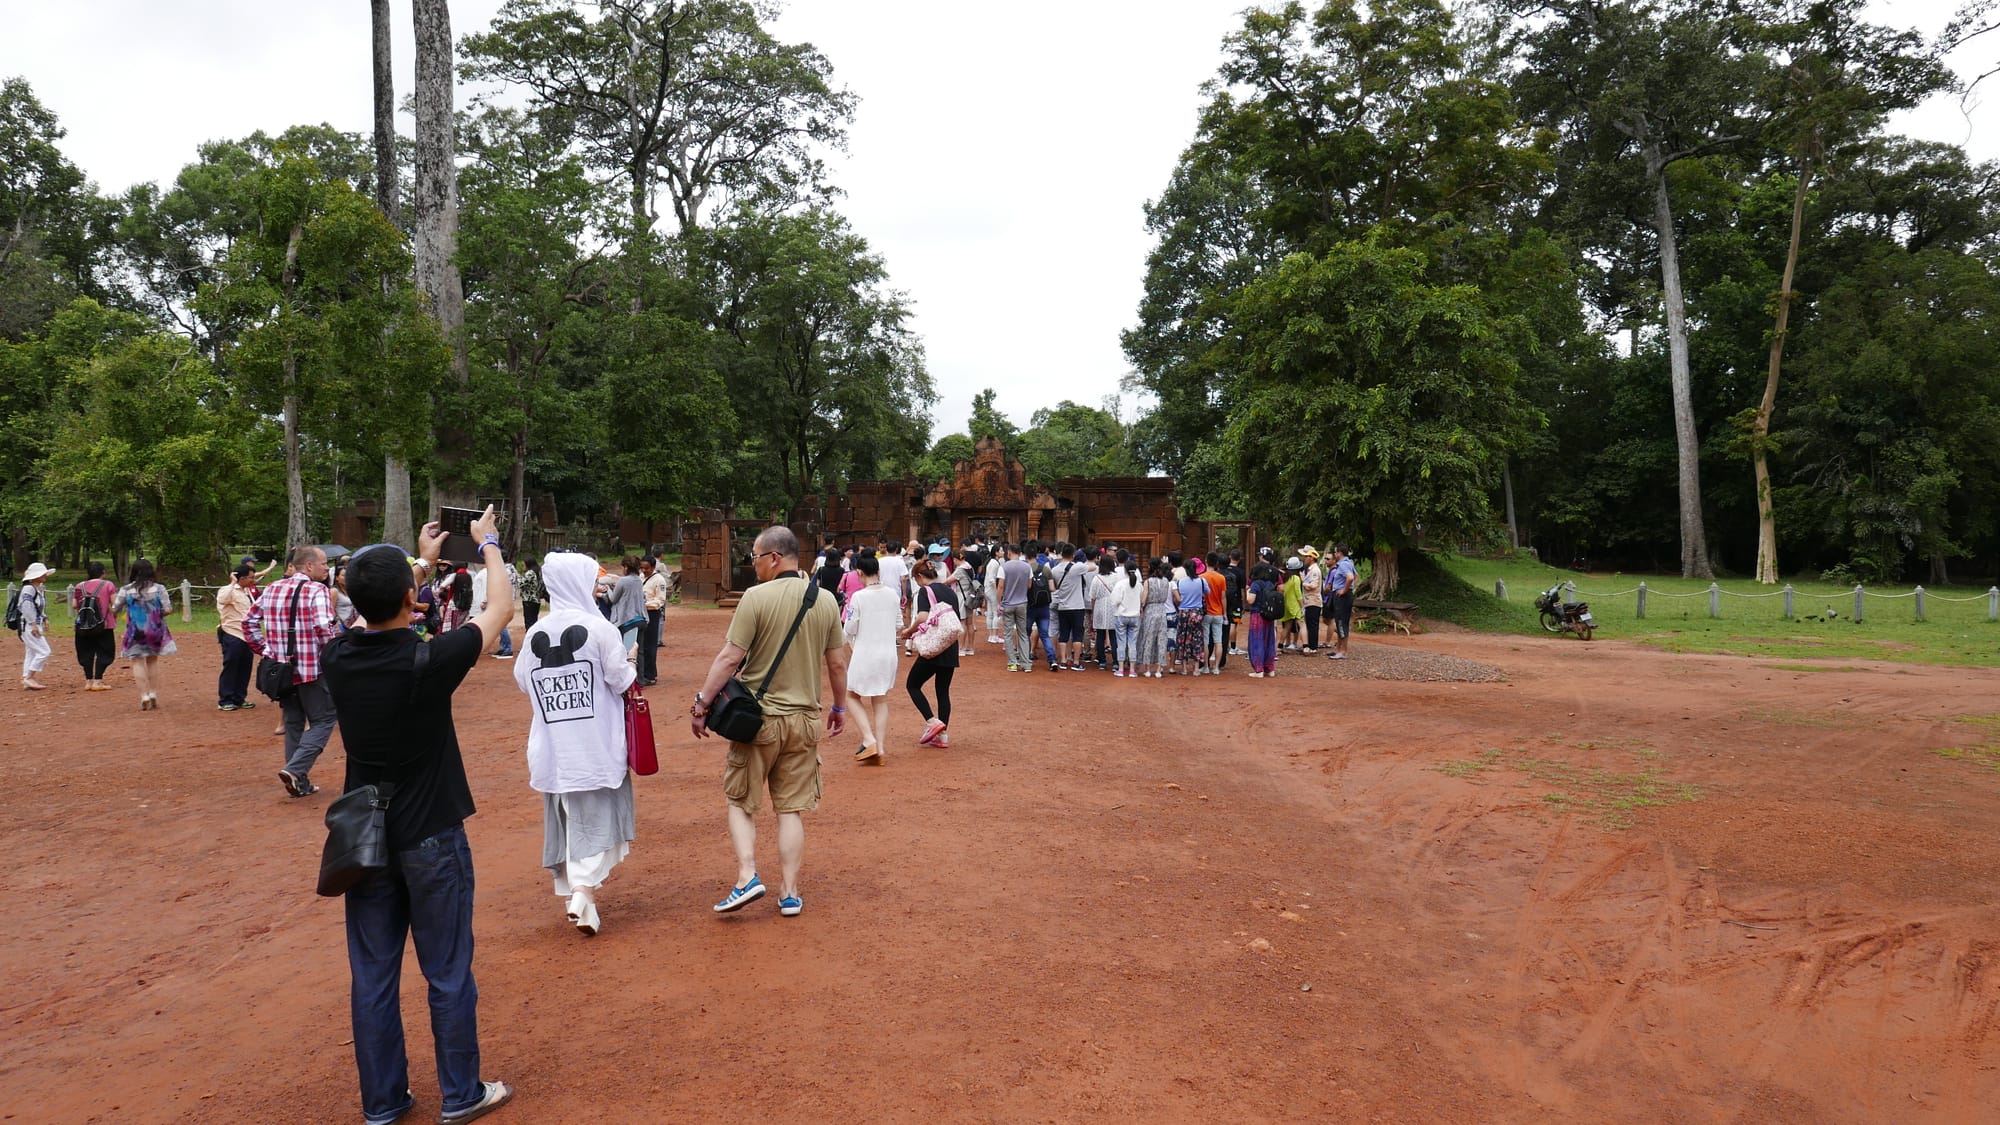 Photo by Author — the crowds at Banteay Srei Temple (ប្រាសាទបន្ទាយស្រី), Angkor Archaeological Park, Angkor, Cambodia